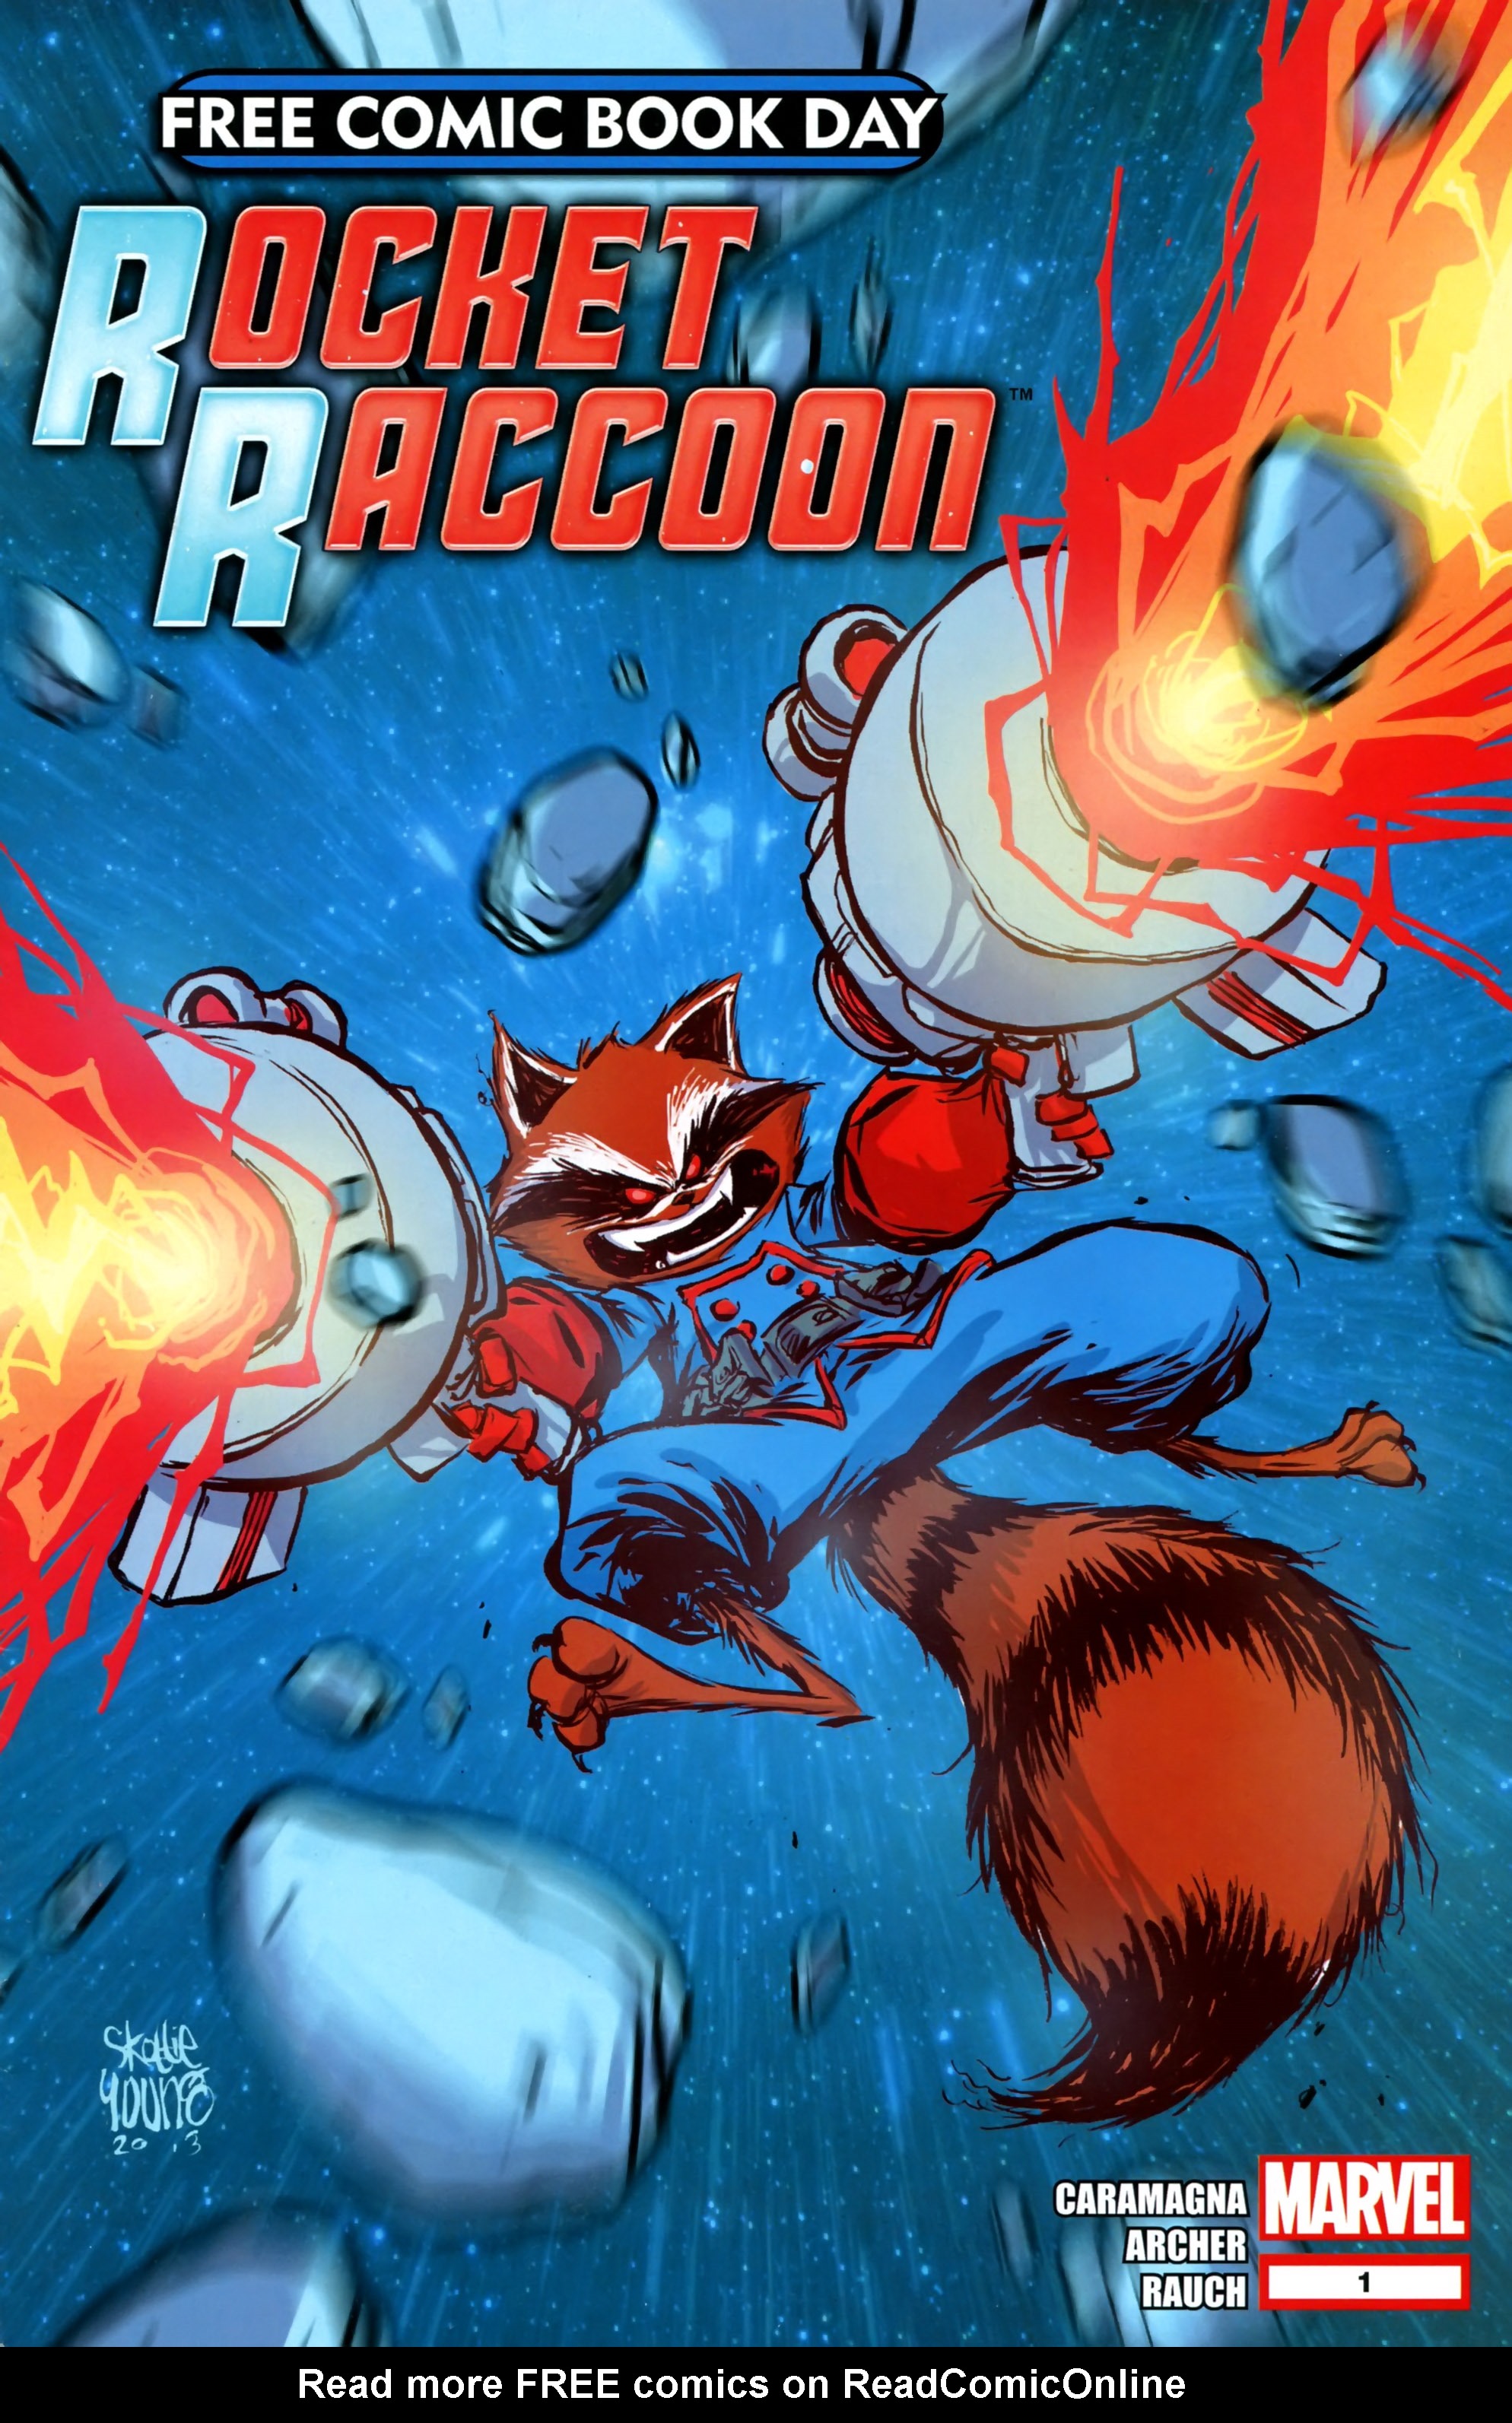 Read online Free Comic Book Day 2014 comic -  Issue # Rocket Raccoon - 1